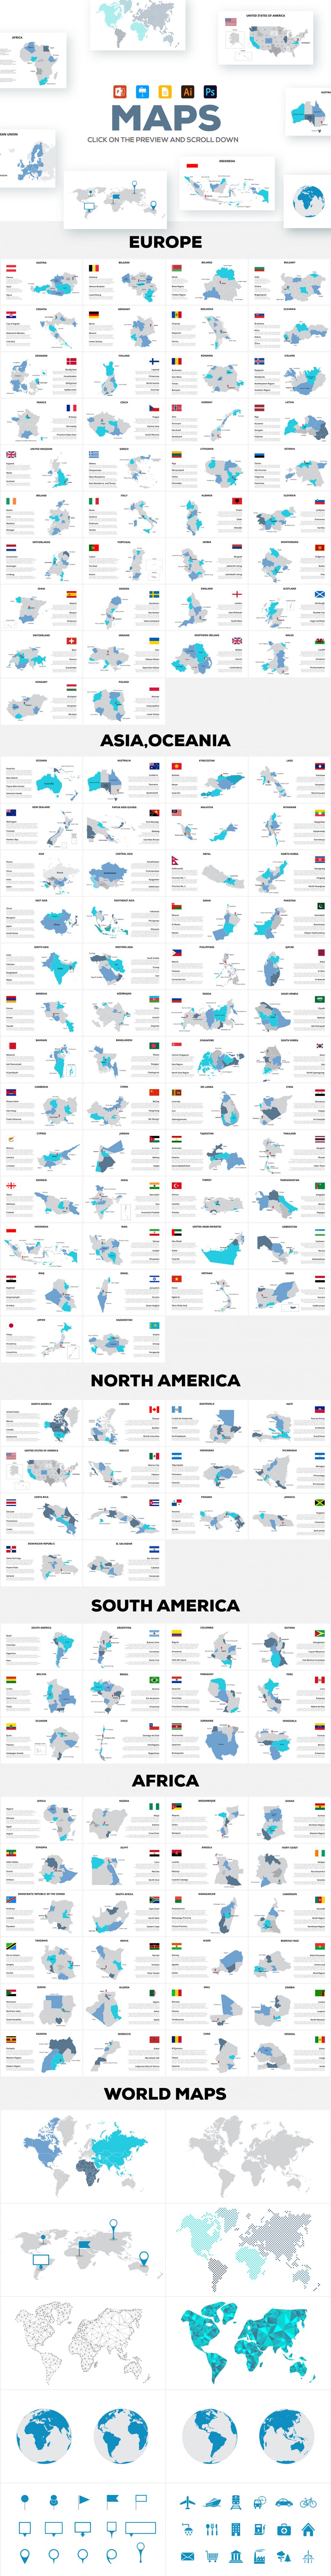 Animated colorful Maps.